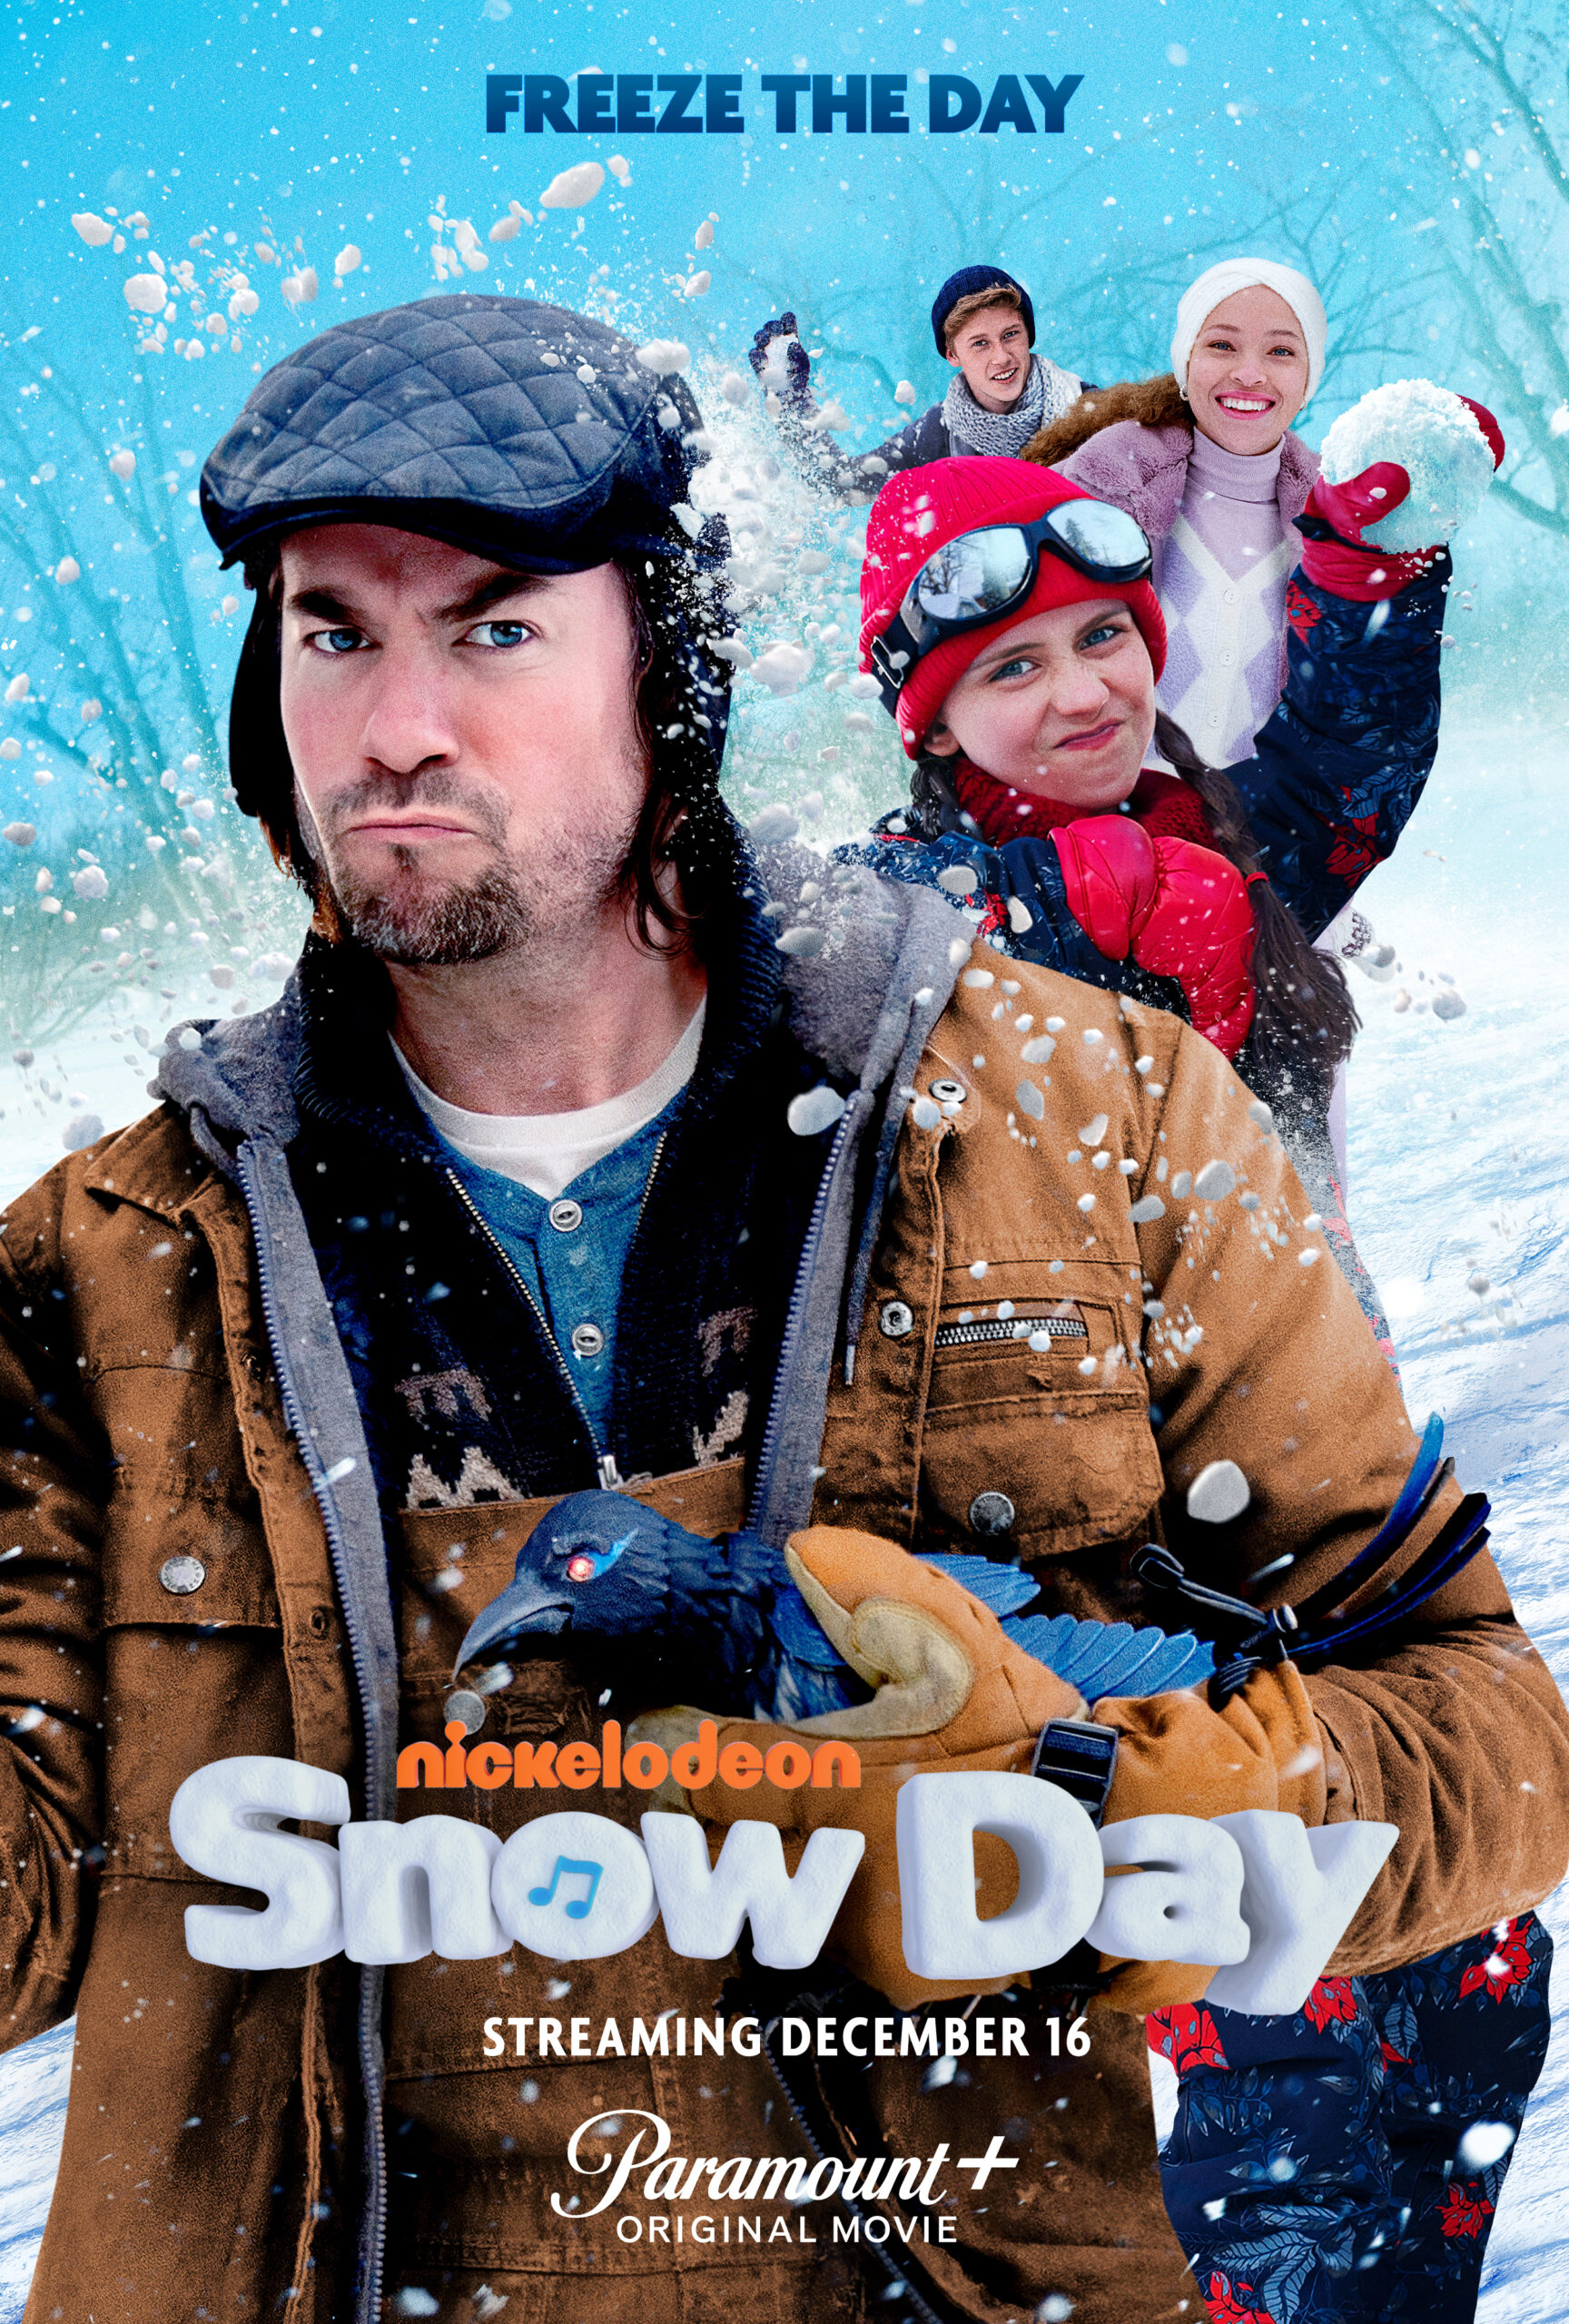 NICKELODEON AND PARAMOUNT+ SET DECEMBER 16 FOR PREMIERE OF SNOW DAY, ORIGINAL MOVIE MUSICAL BASED ON ICONIC CLASSIC